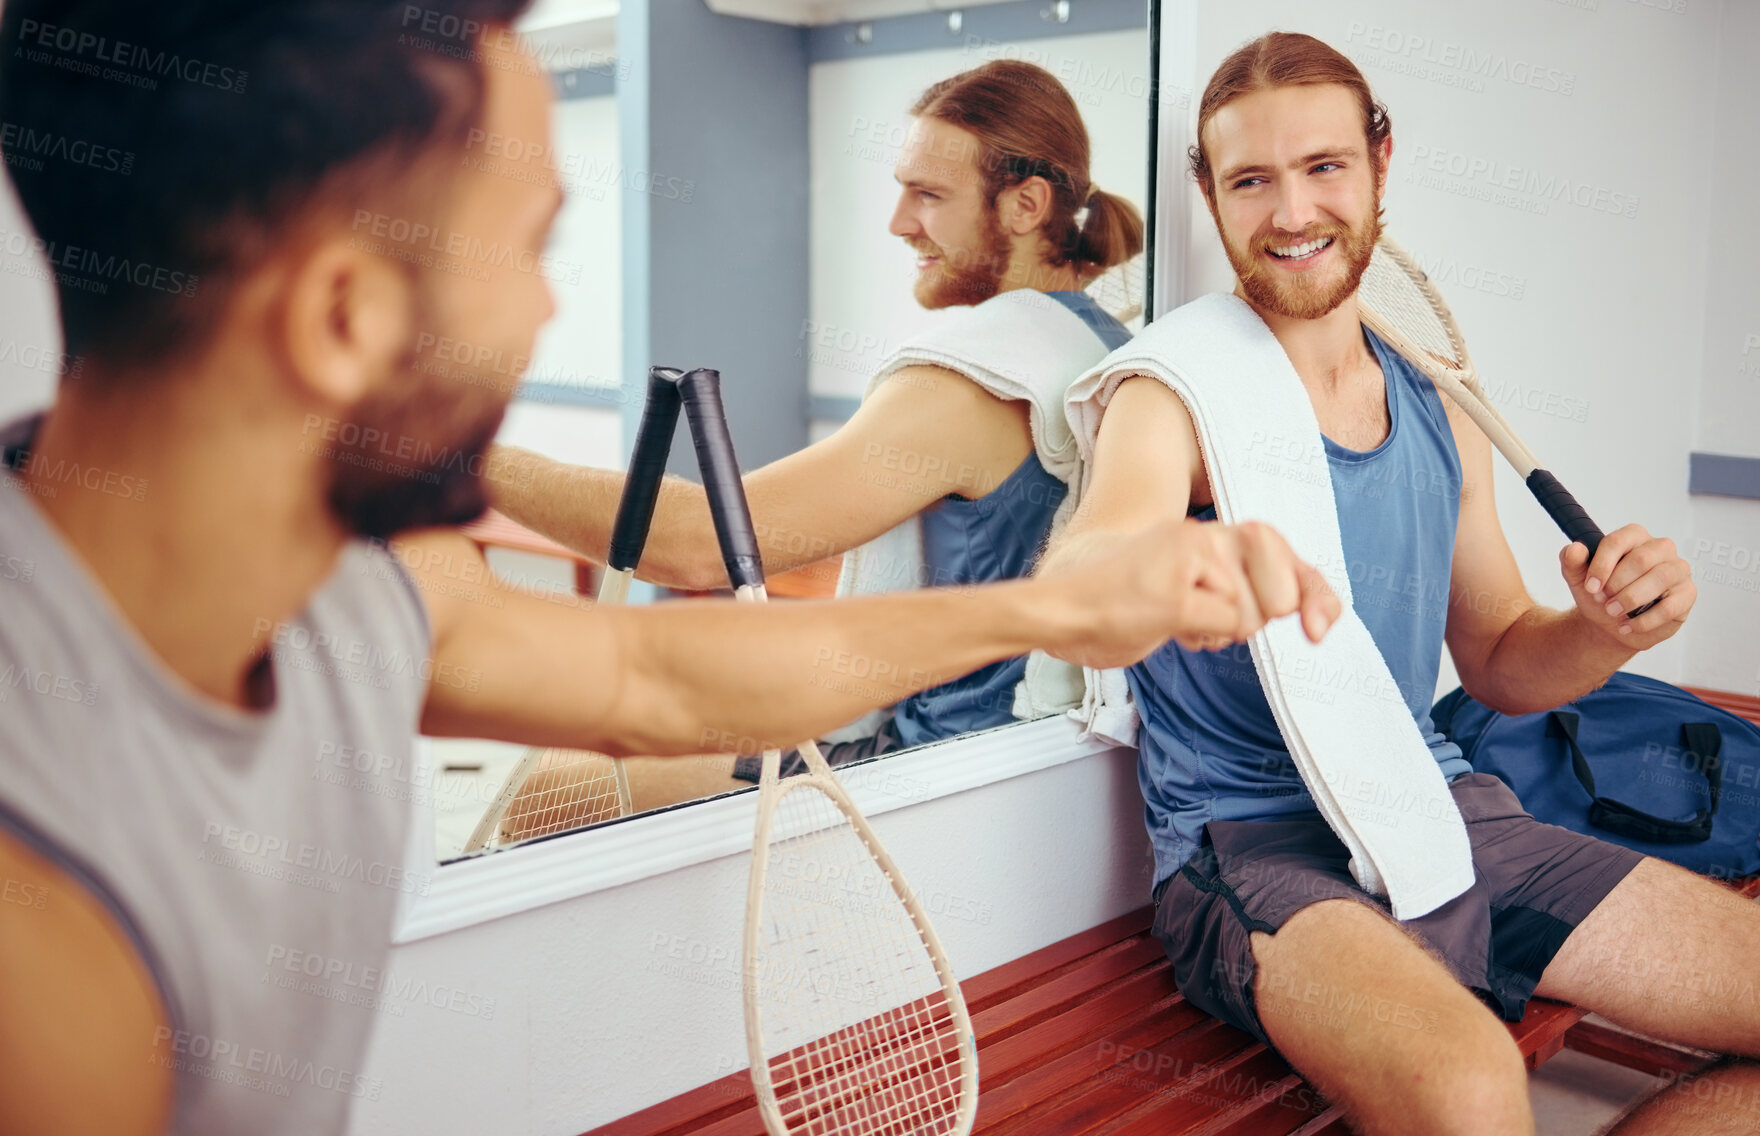 Buy stock photo Two squash players giving each other a fist bump. Cheerful friends bonding in a gym locker room. Athletes being social and bonding with each other. Players fist bumping one another before a match